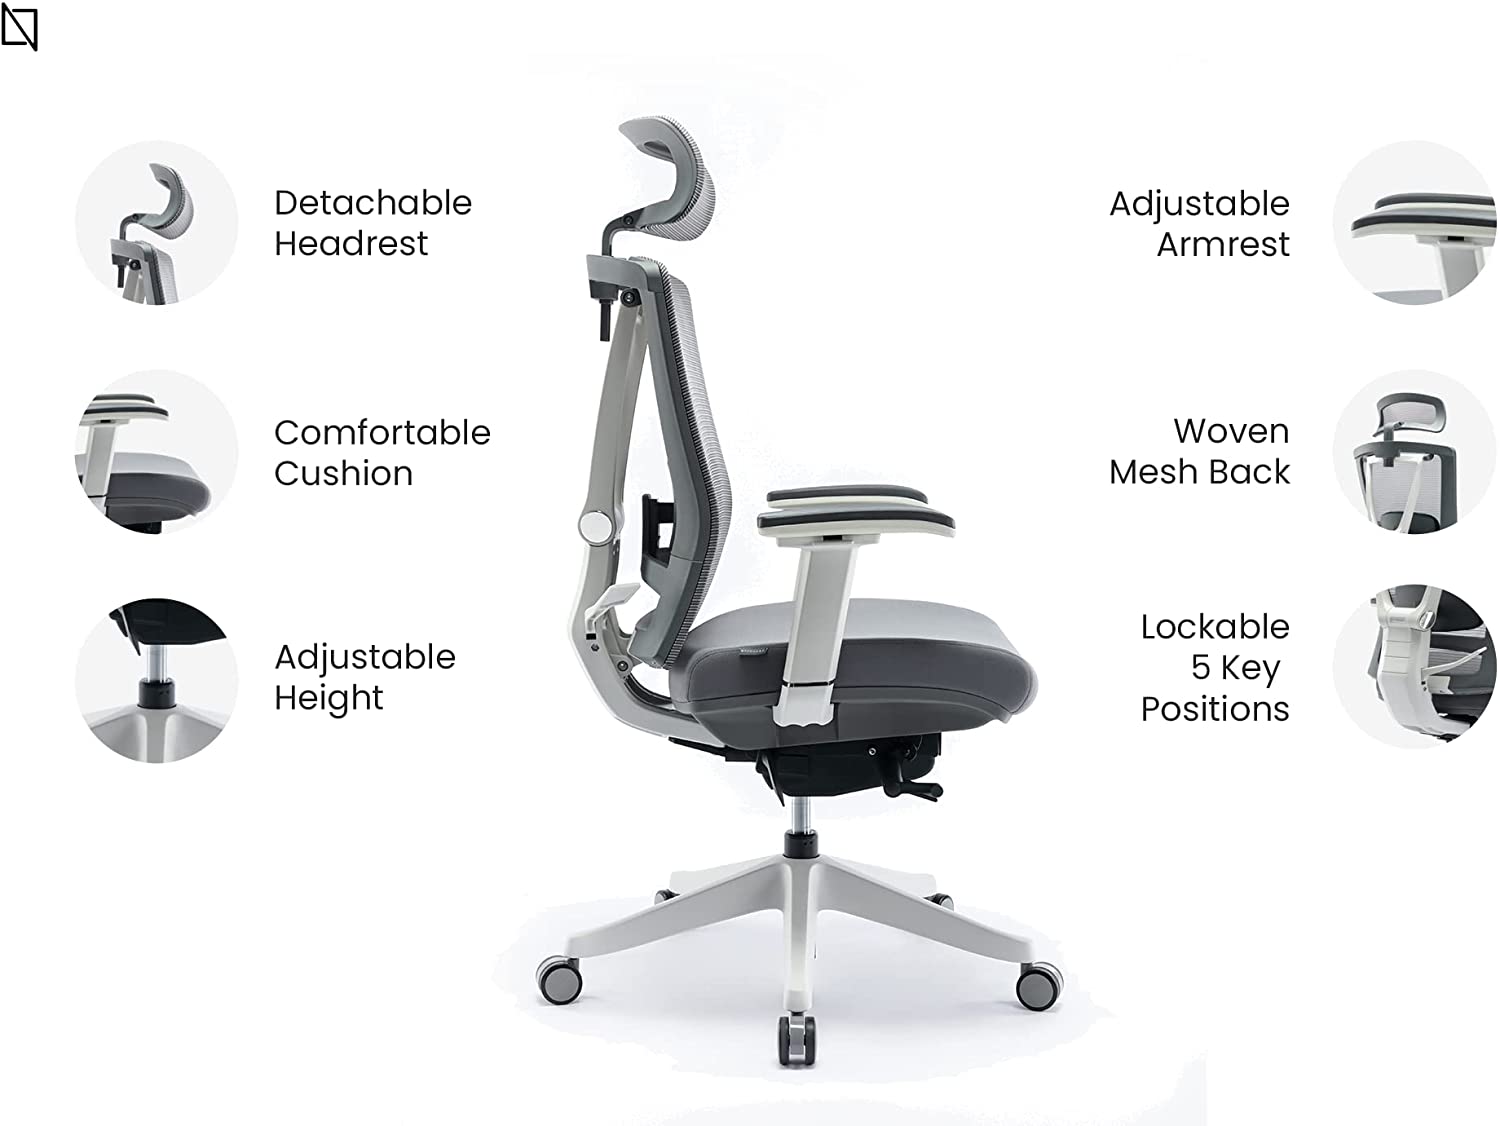 HALO Chair Premium Ergonomic Gaming & Office Chair with Multi Adjustable Features by Navodesk®